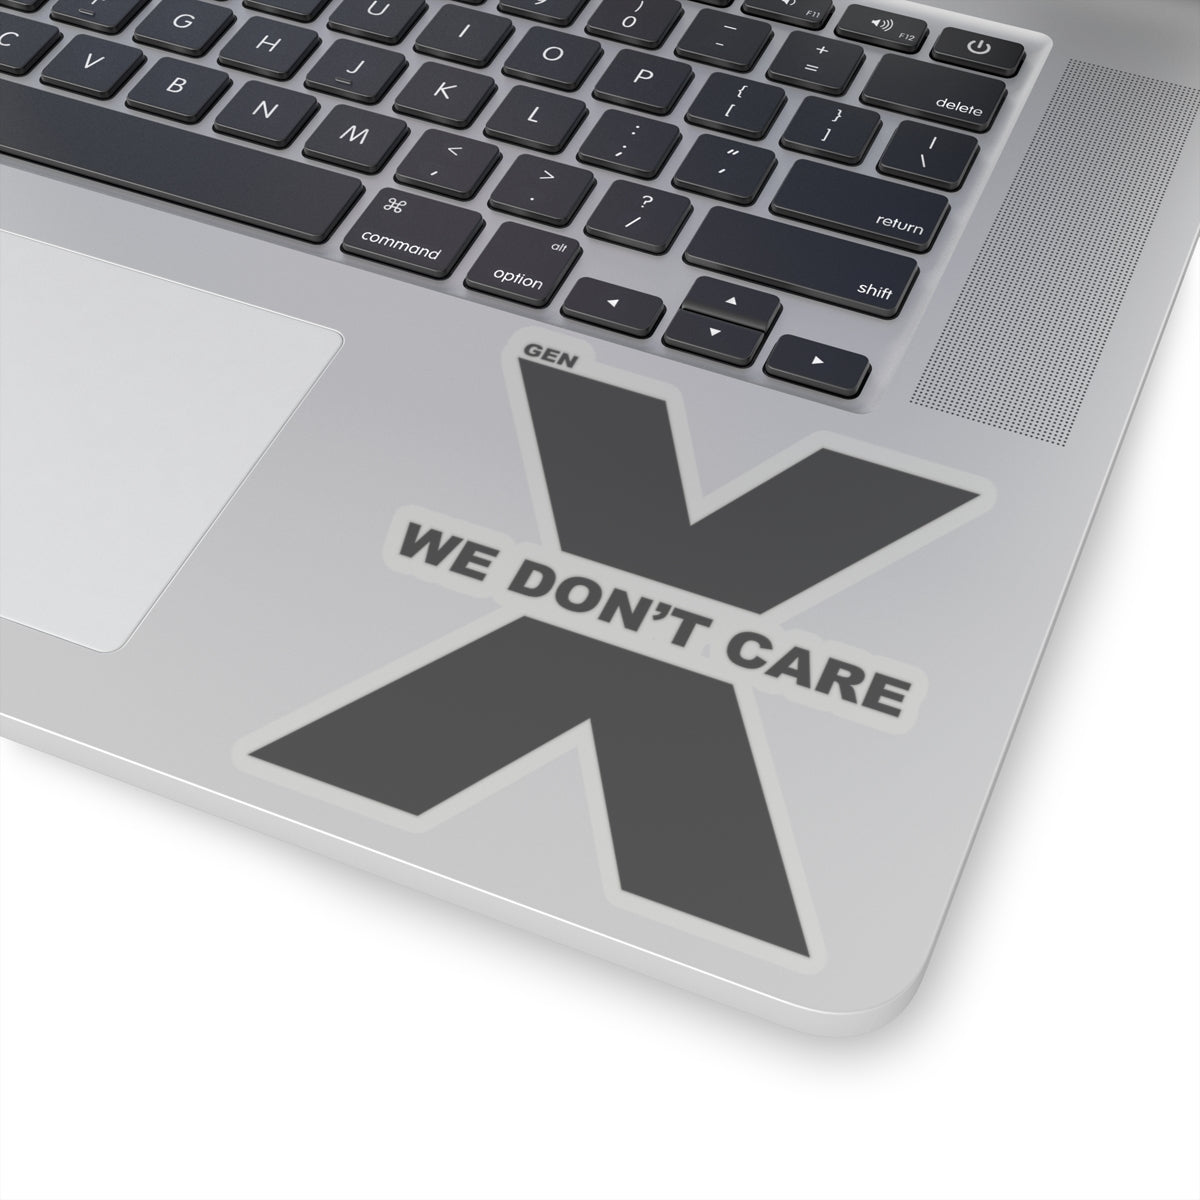 Trans Gen X -We Don't Care -4x4" Sticker By Generation Mood